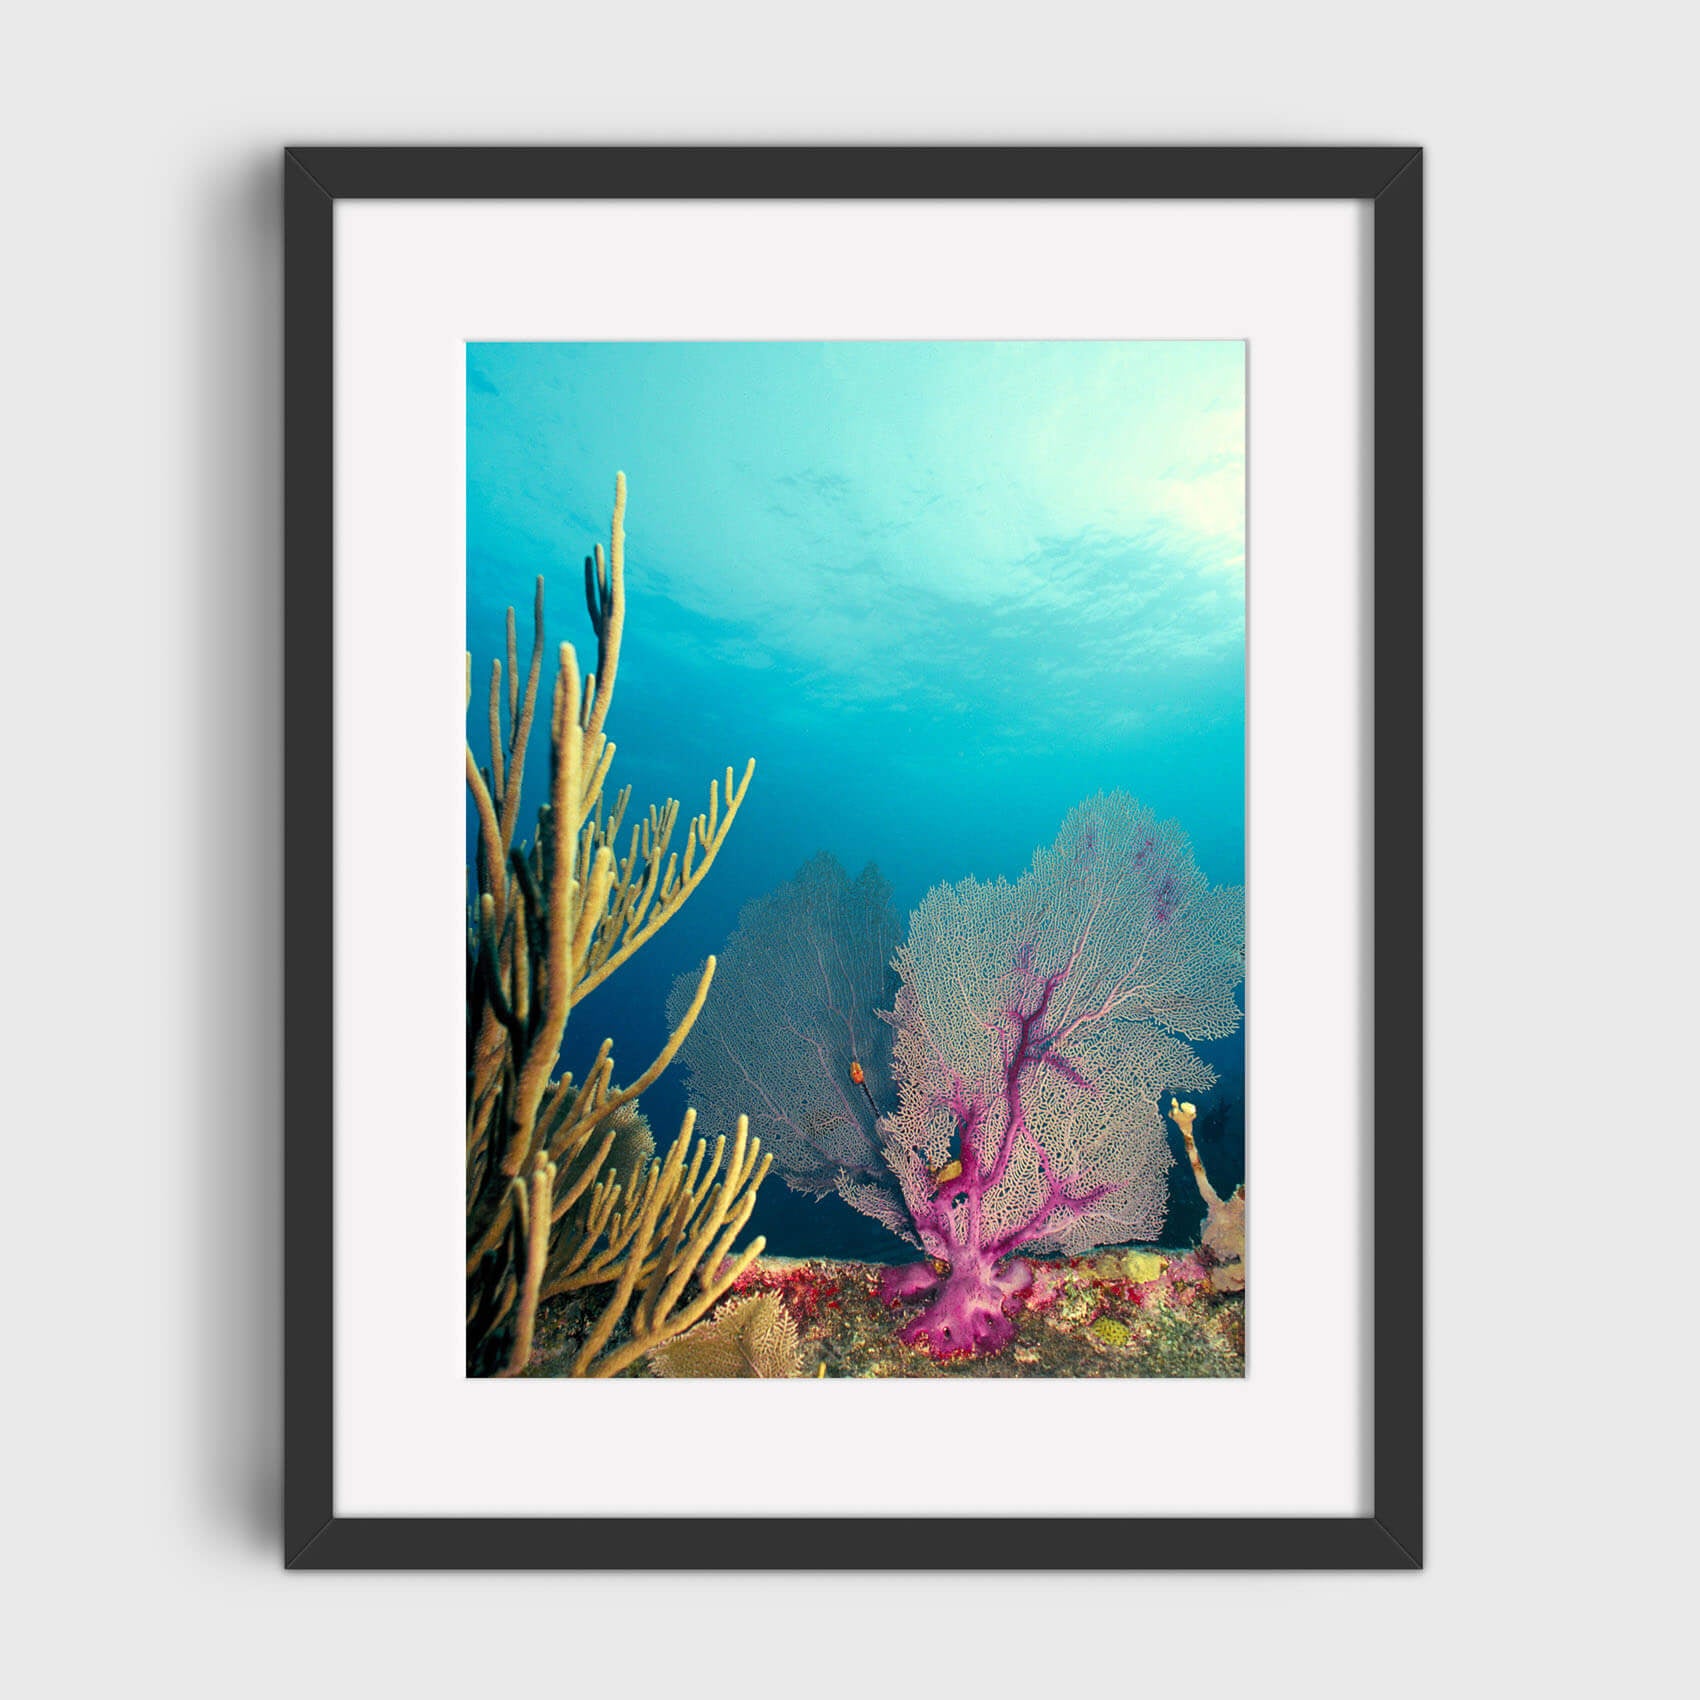 Tranquil Waters - Care Studios Prints